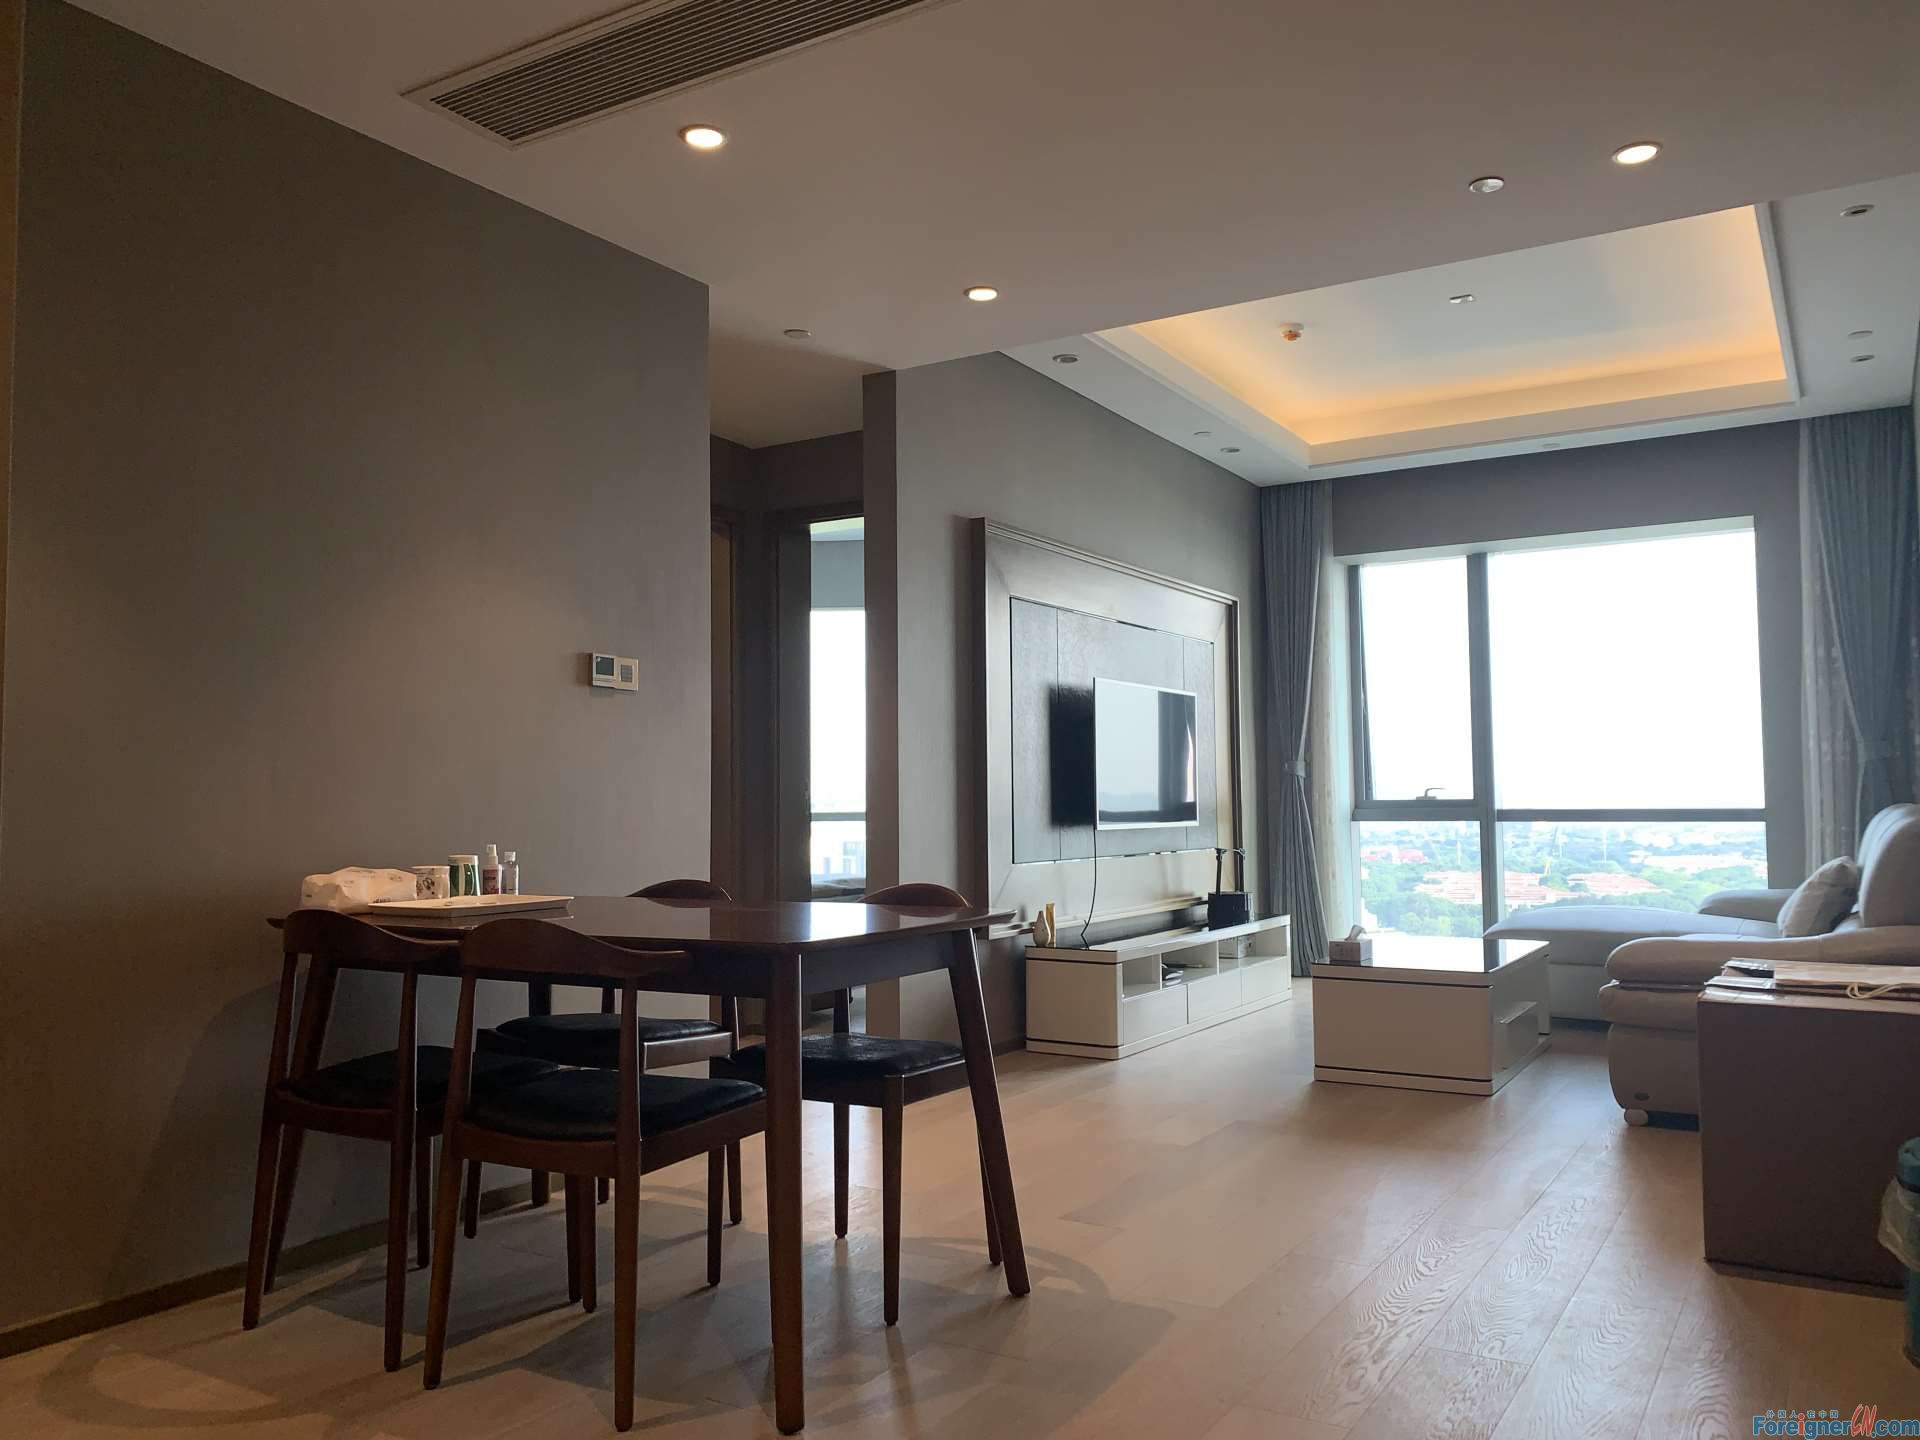 Fantastic!! ! Apartment rent for expats /Times square /2 bedrooms and 1 bathroom/modern design/central AC/Jinji lake 